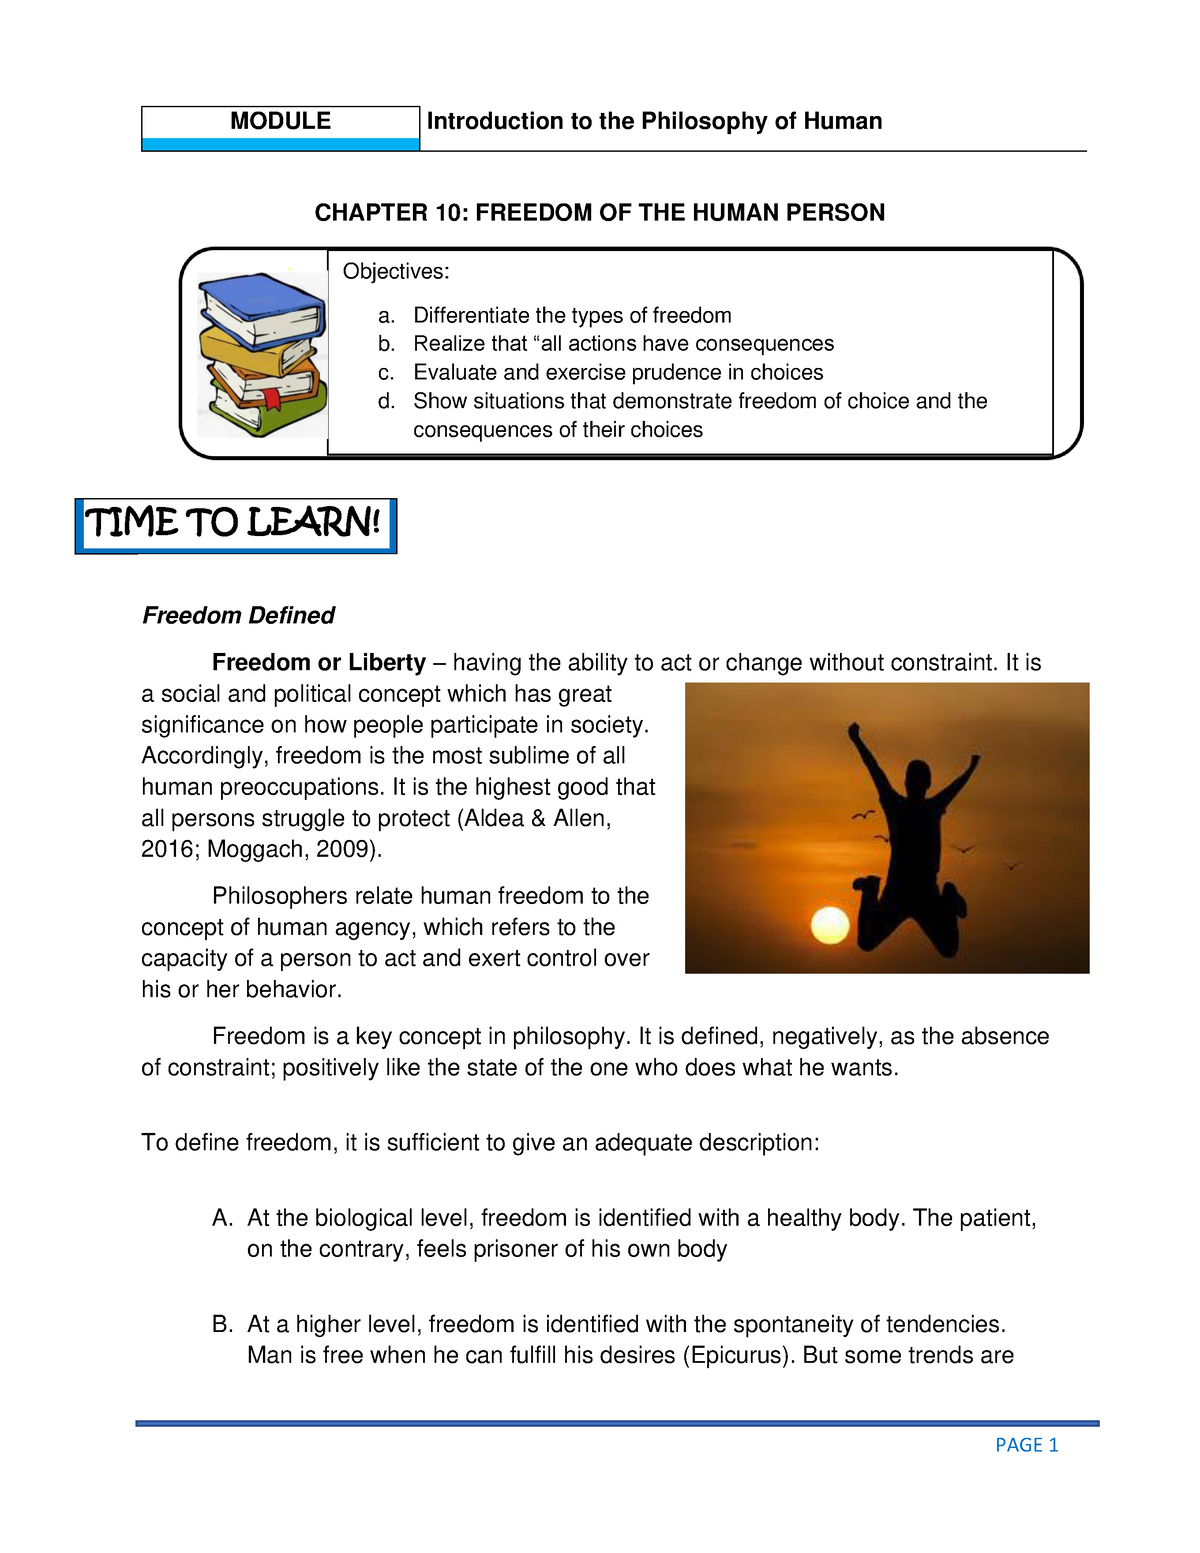 essay about freedom of human person